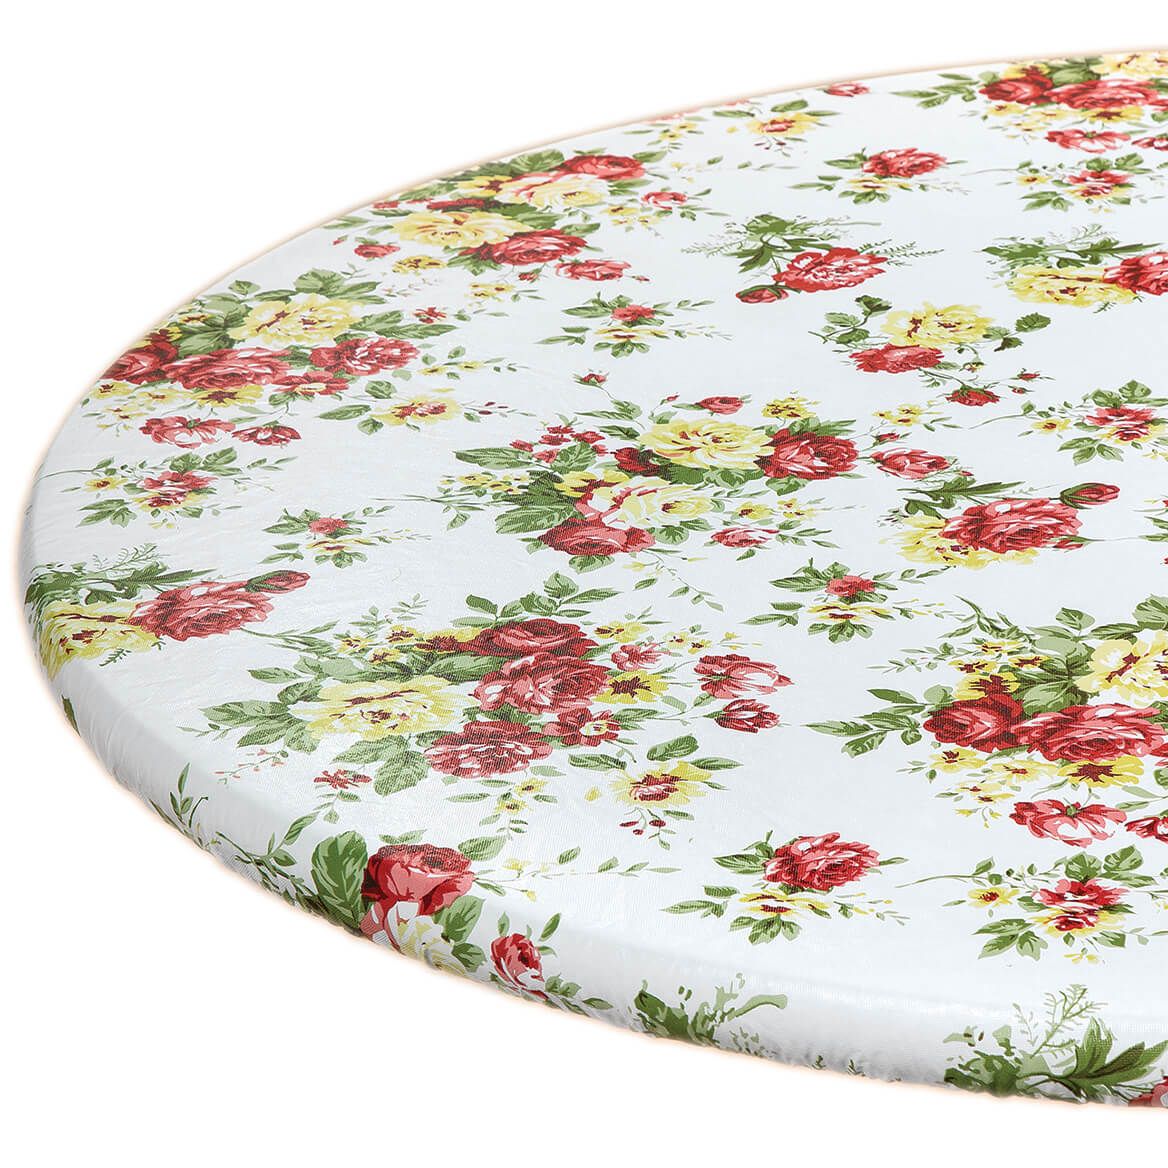 Country Rose Elasctized Vinyl Table Cover by Chef's Pride™ + '-' + 368835